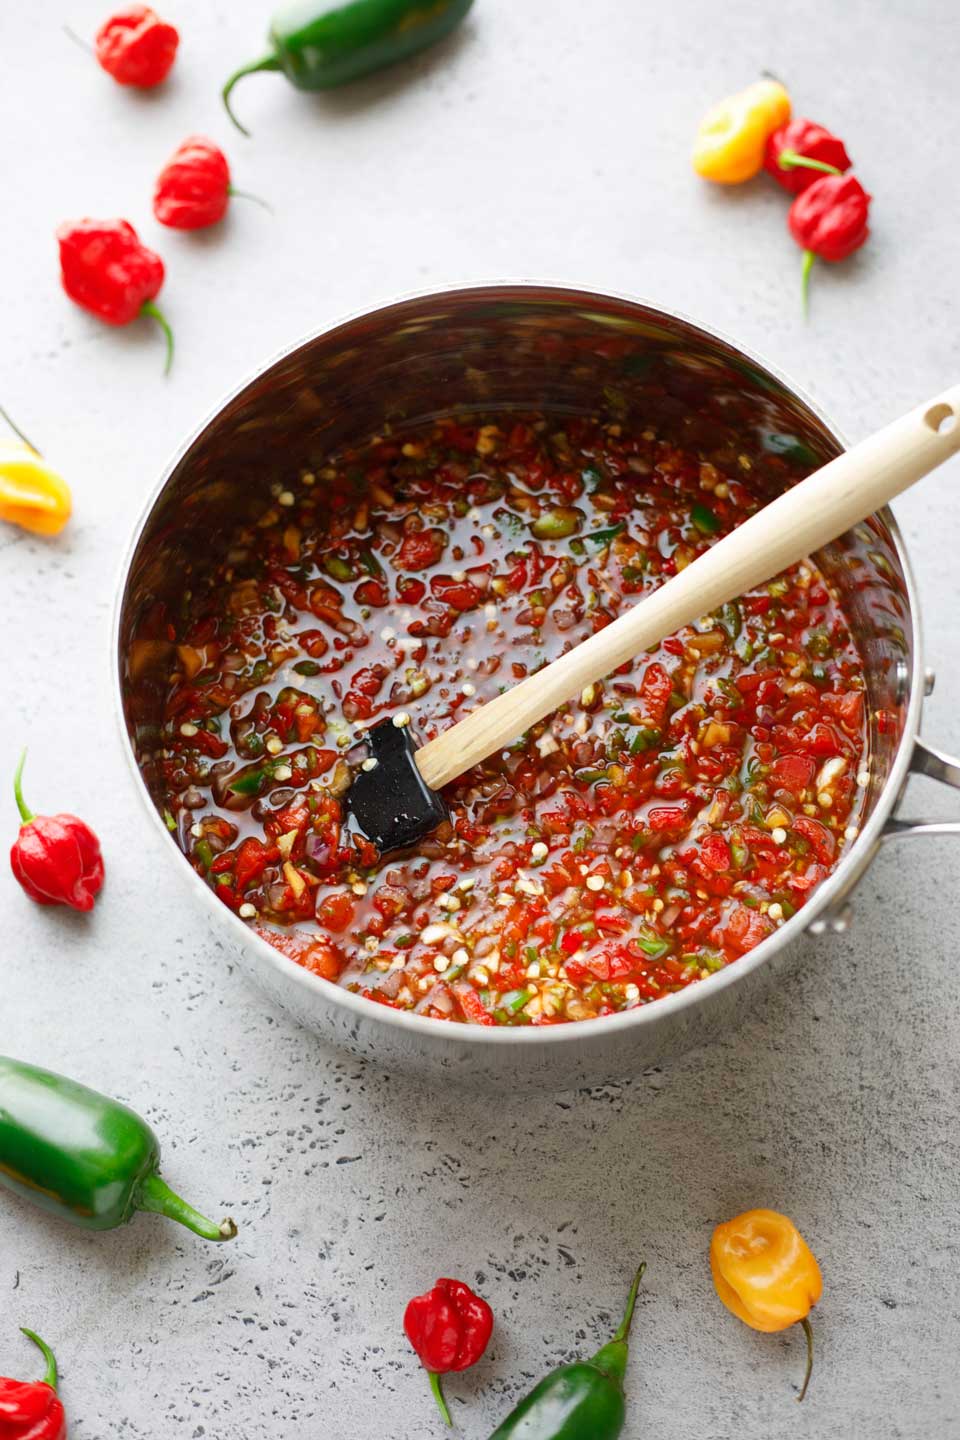 Large silver pot full of ingredients being stirred, with raw hot peppers scattered in background.